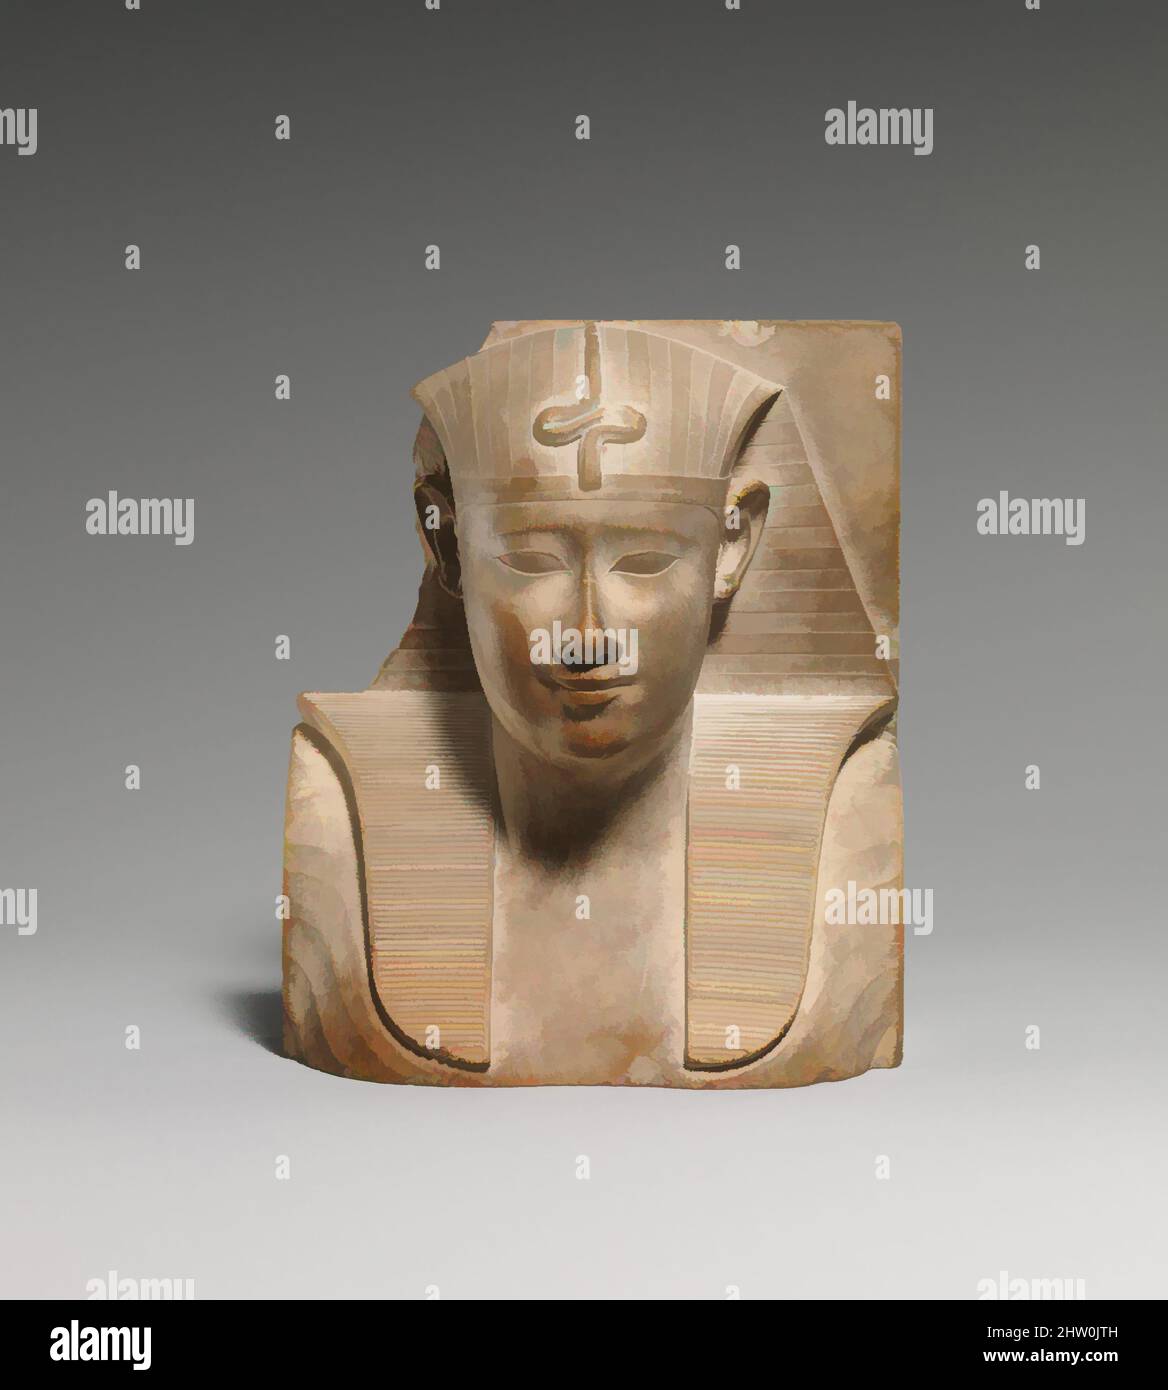 Art inspired by Royal bust with atypical snake, Late Period–Ptolemaic Period, Dynasty 30, 400–200 B.C., From Egypt, Alabaster (gypsum), H. 12 cm (4 3/4 in.); W. 10 cm (3 15/16 in.); D. 4.3 cm (1 11/16 in.), Small Late Period and Ptolemaic reliefs or sculptures that depict a subject in, Classic works modernized by Artotop with a splash of modernity. Shapes, color and value, eye-catching visual impact on art. Emotions through freedom of artworks in a contemporary way. A timeless message pursuing a wildly creative new direction. Artists turning to the digital medium and creating the Artotop NFT Stock Photo